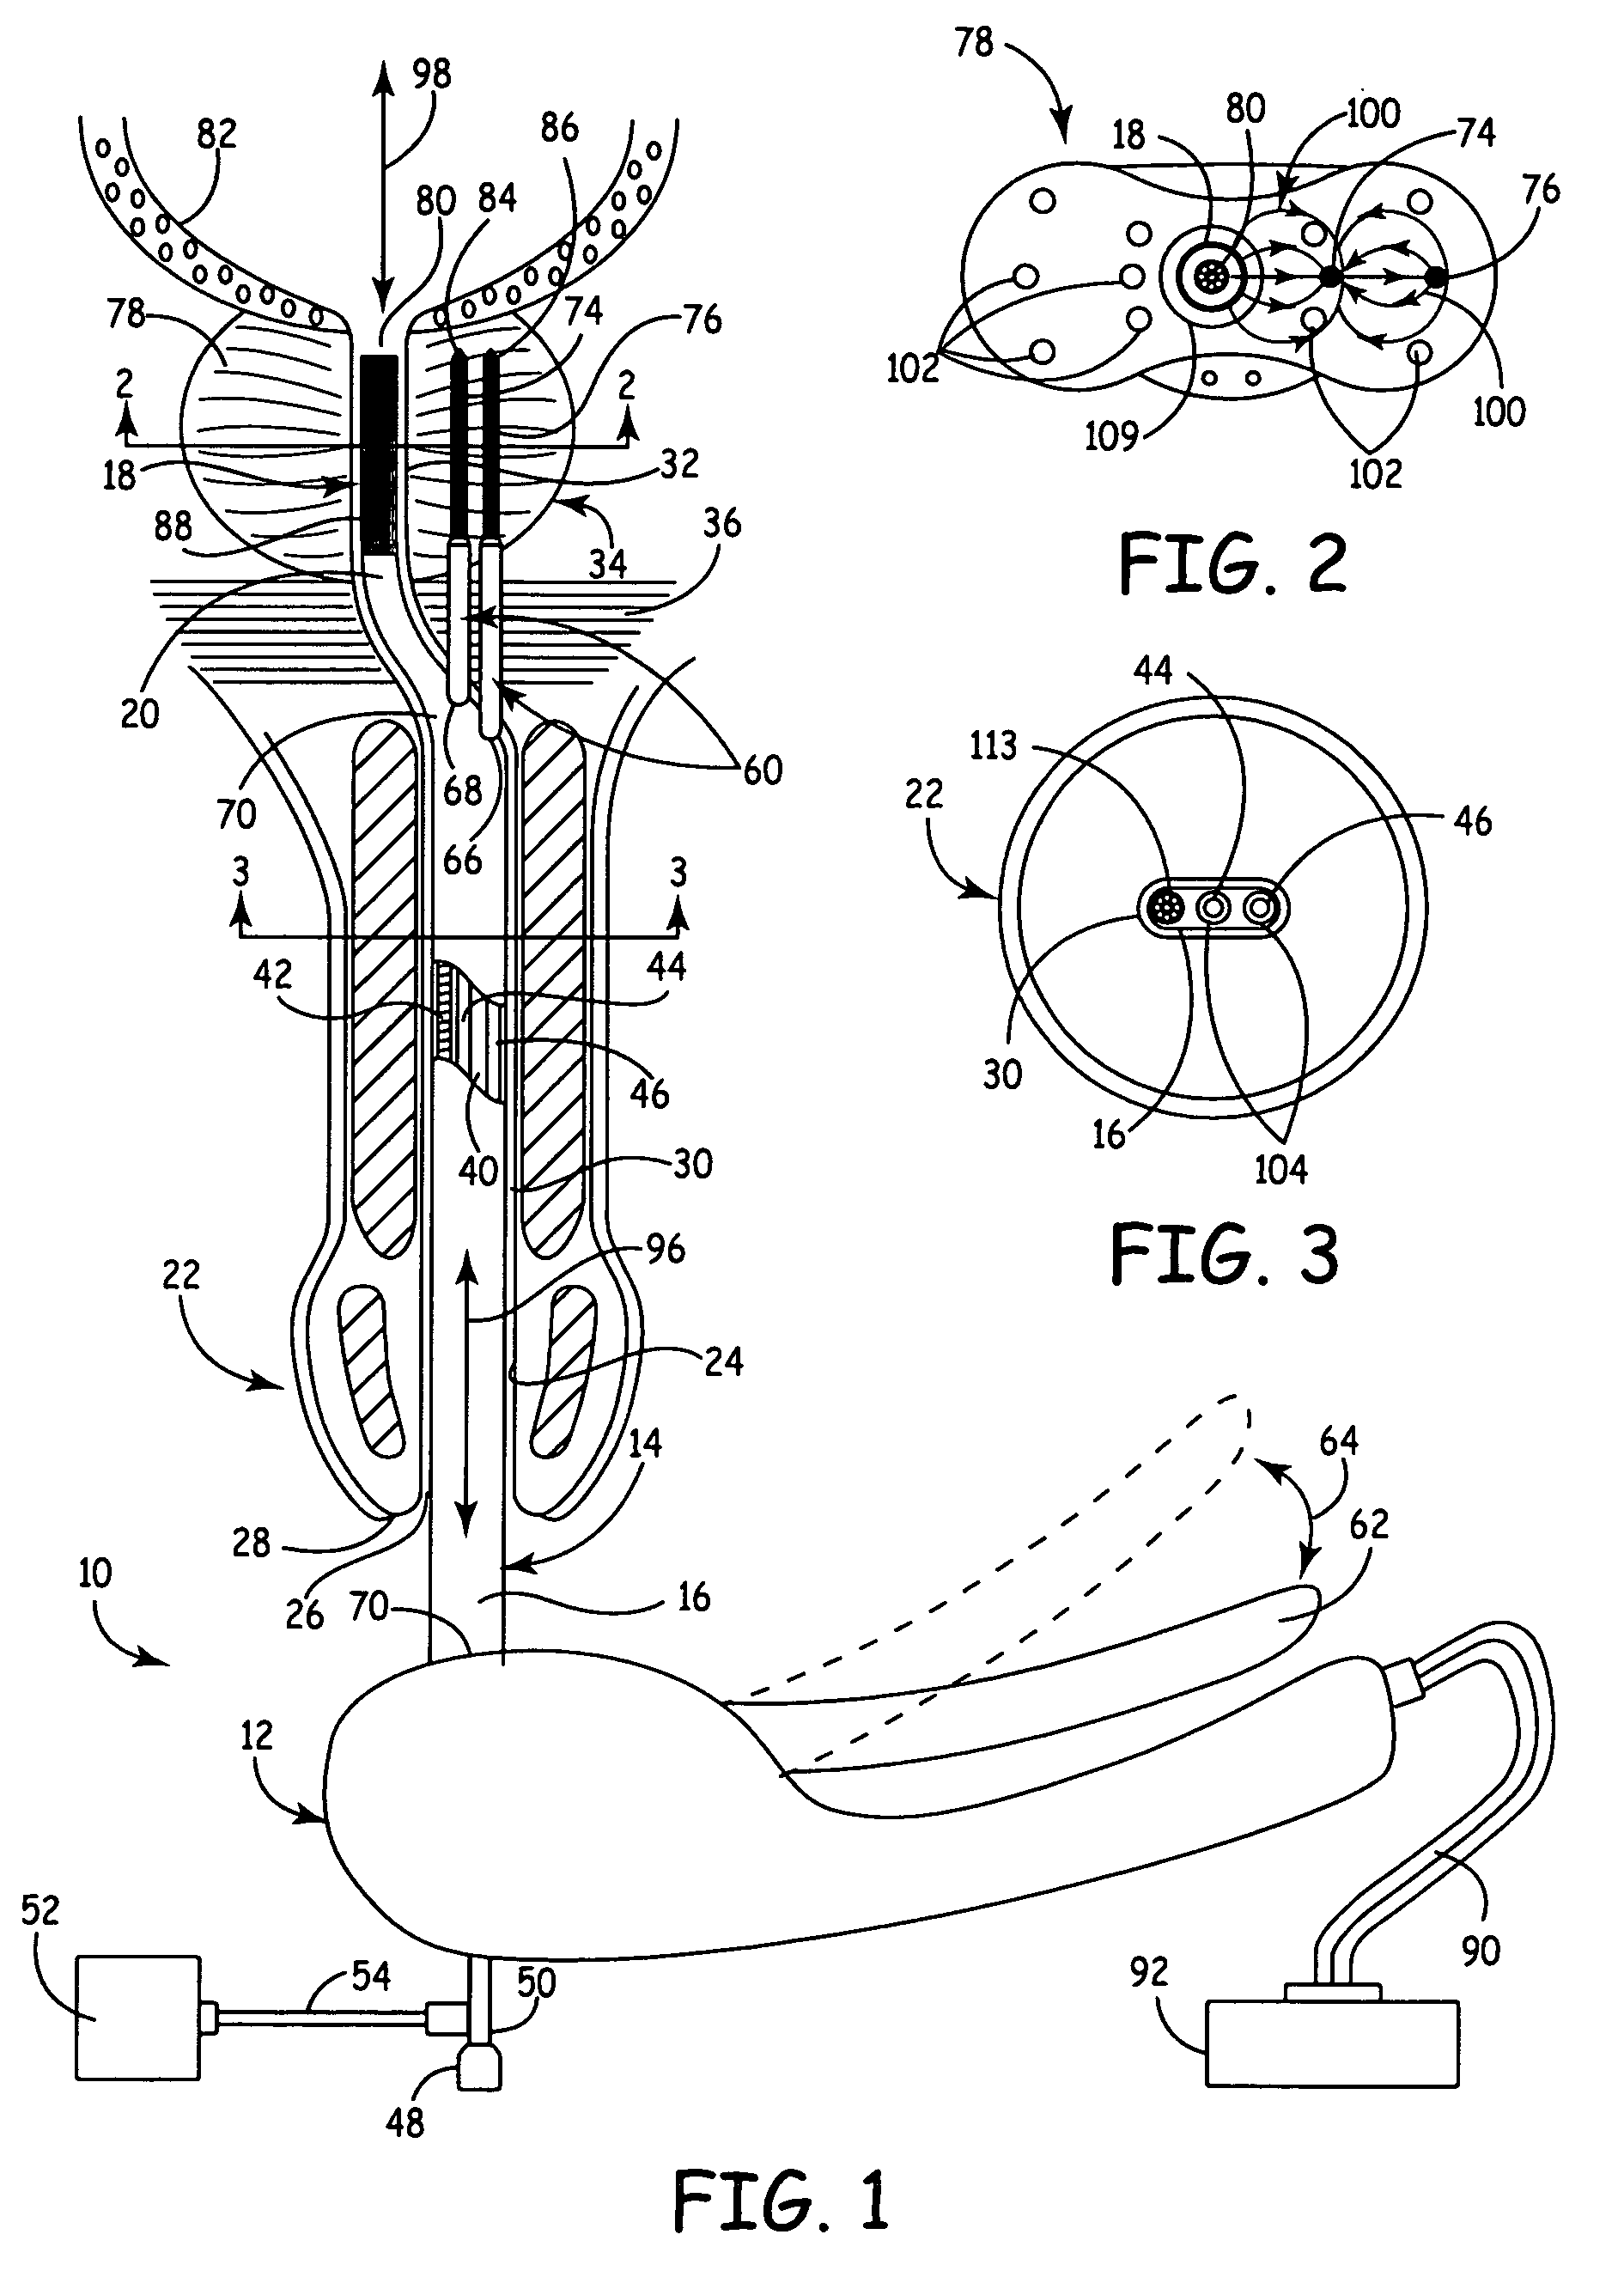 Apparatus and method for the treatment of benign prostatic hyperplasia